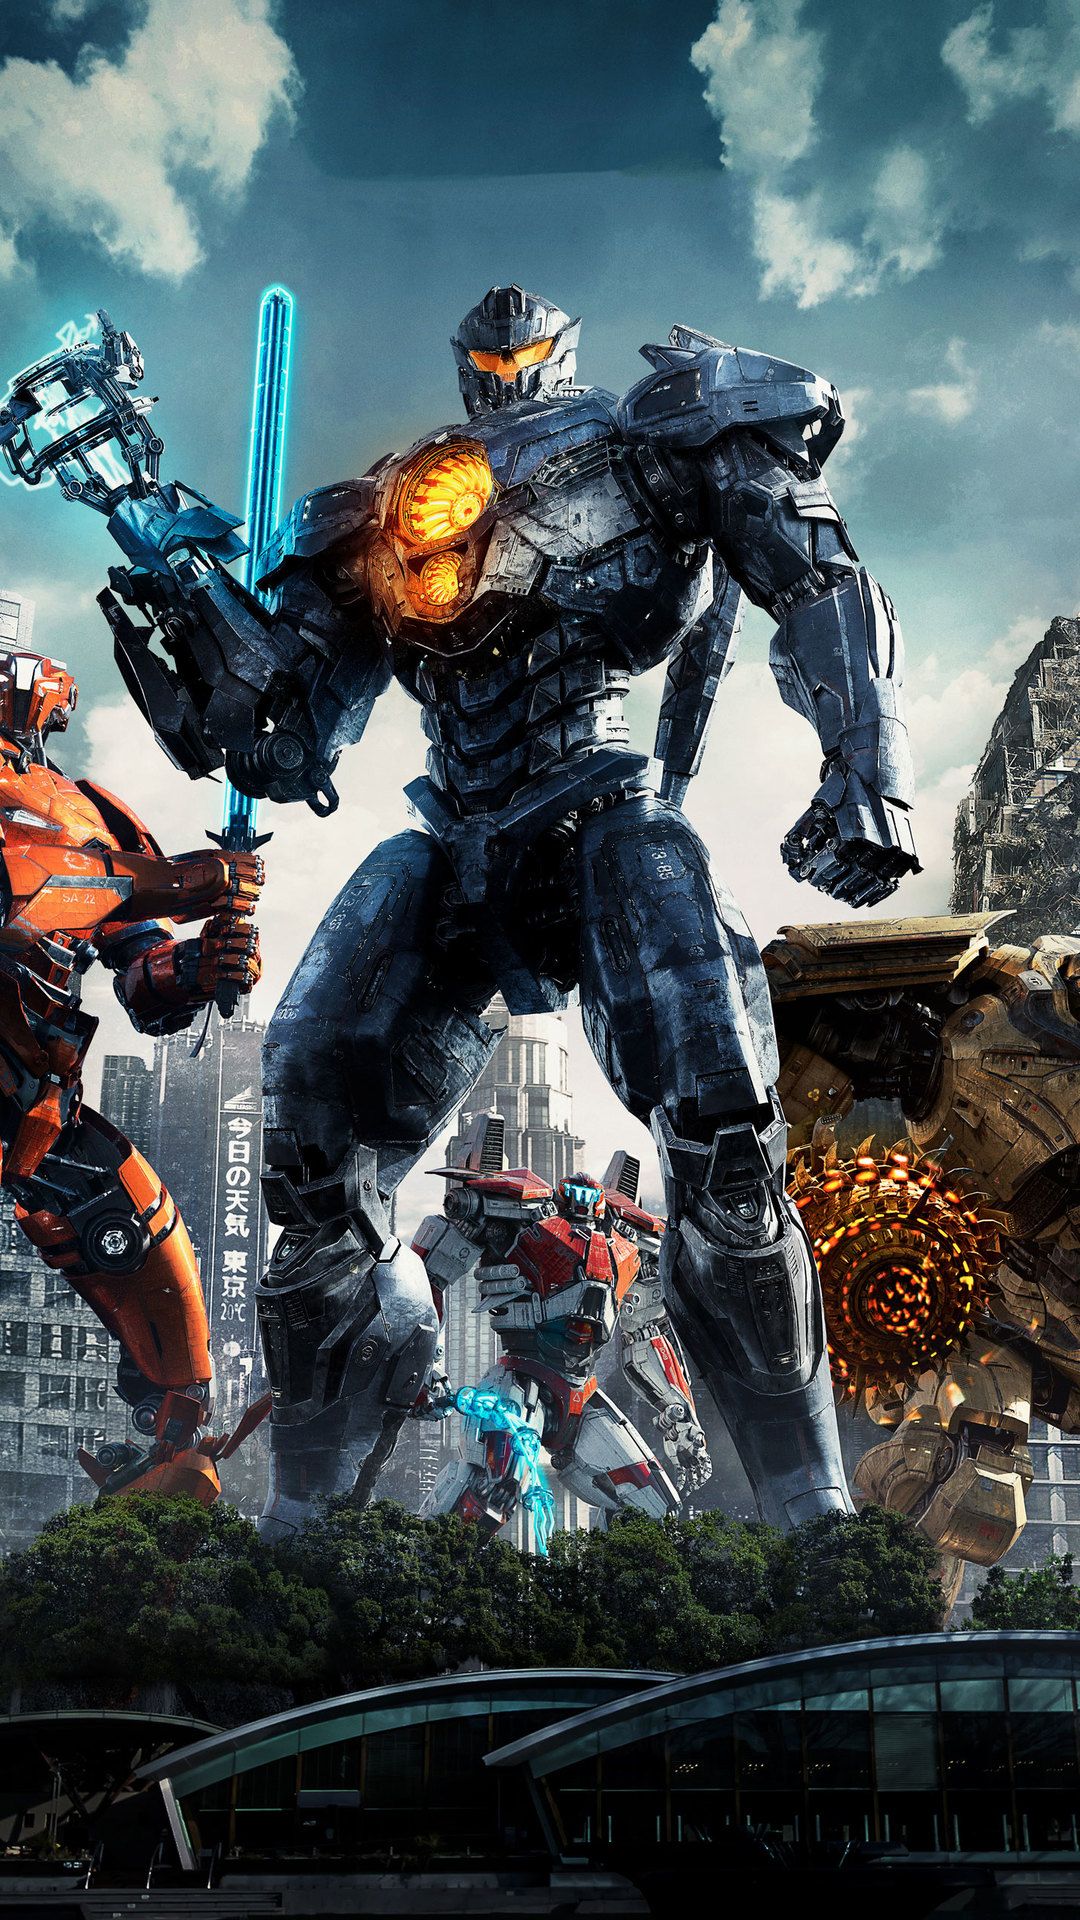 Pacific Rim Uprising poster htc one wallpaper, free and easy to download